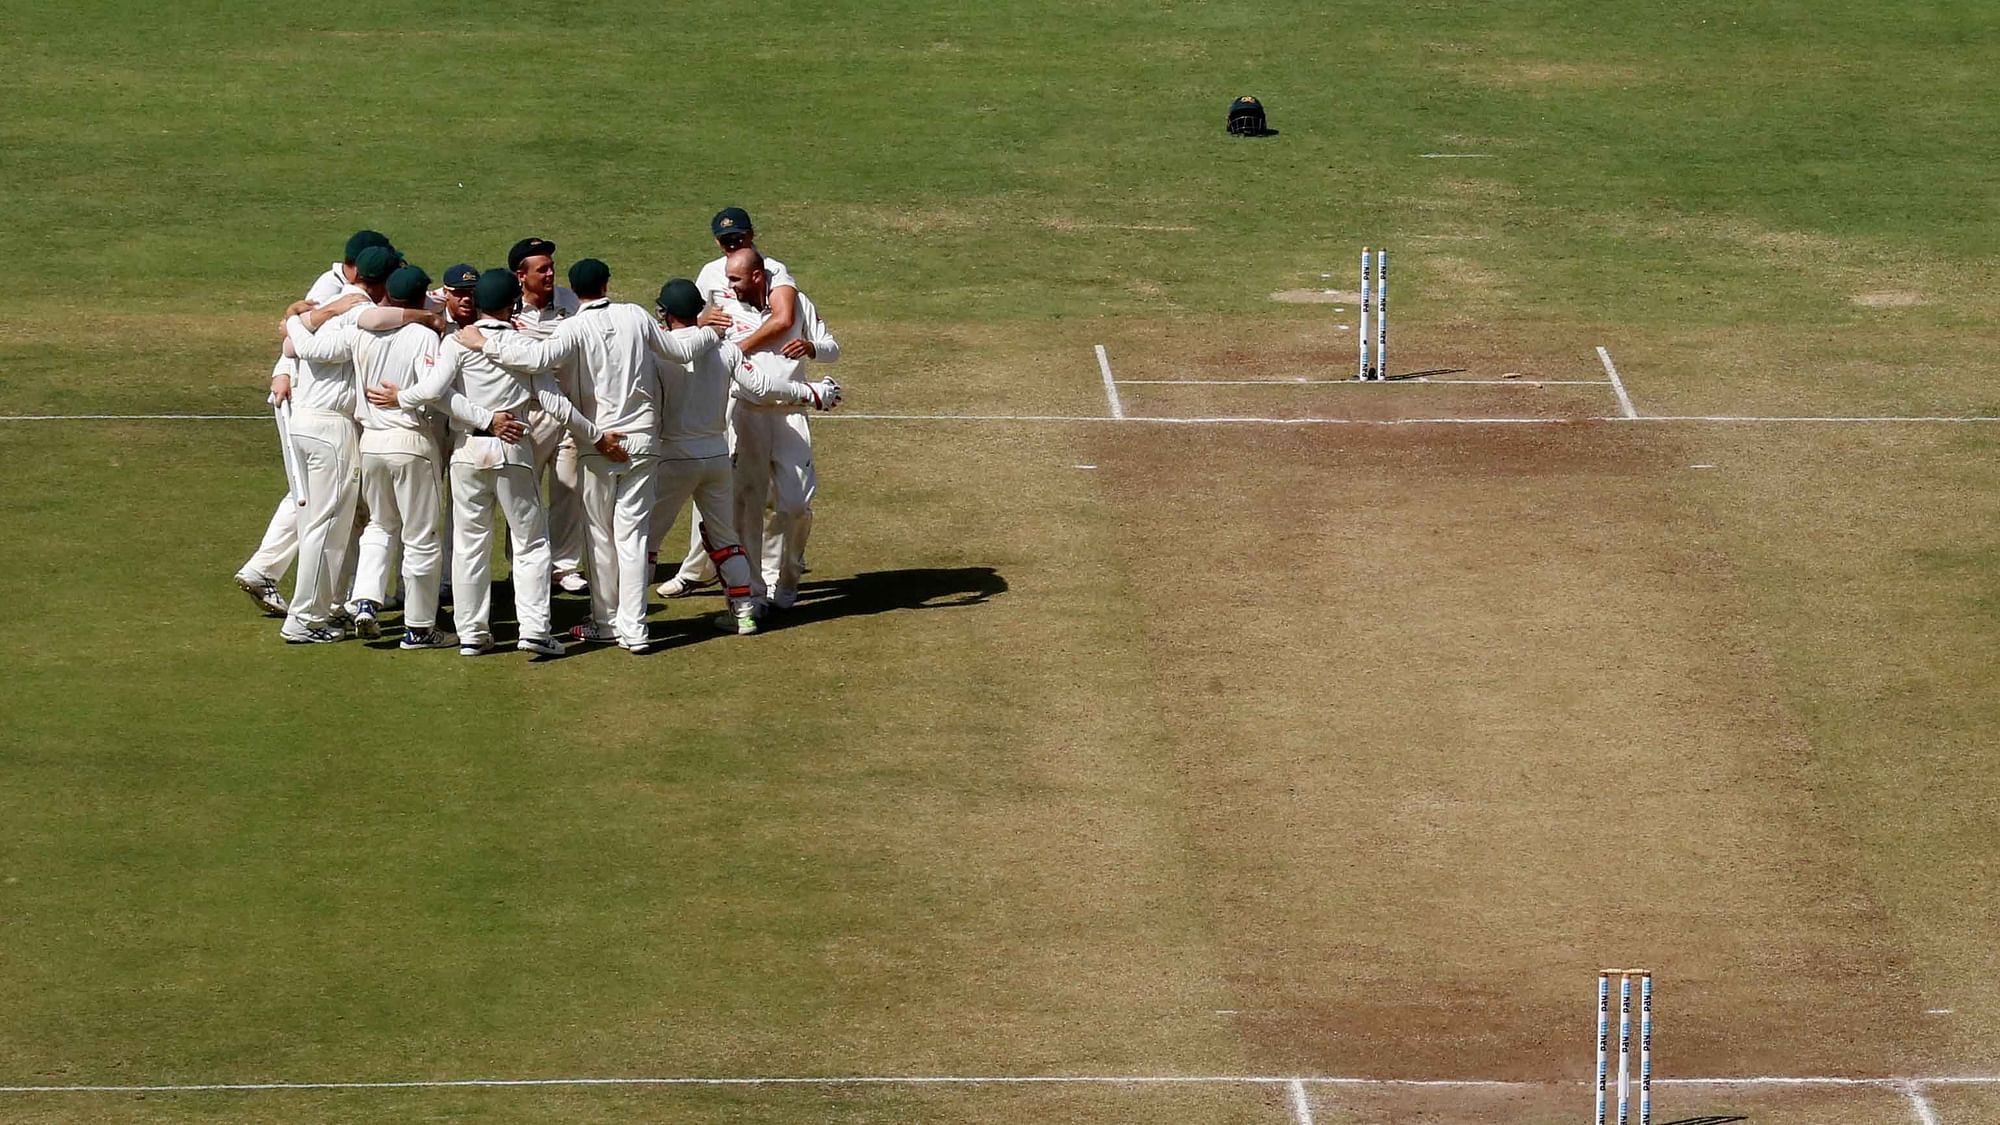 ICC match referee Chris Broad has given a “poor” rating to the Pune pitch. (Photo: Reuters)